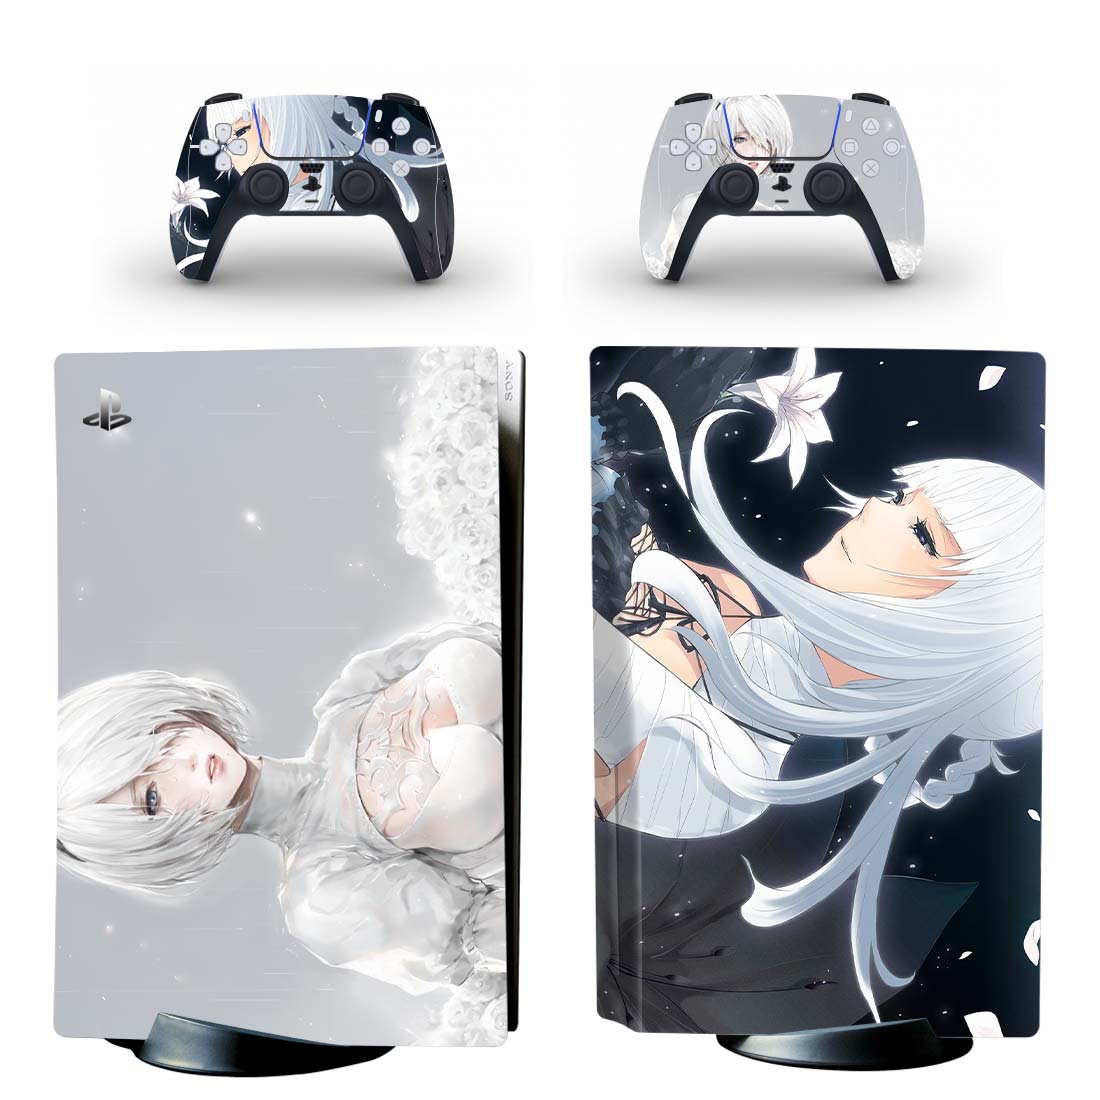 Nier Automata Skin Sticker For PS5 Skin And Controllers